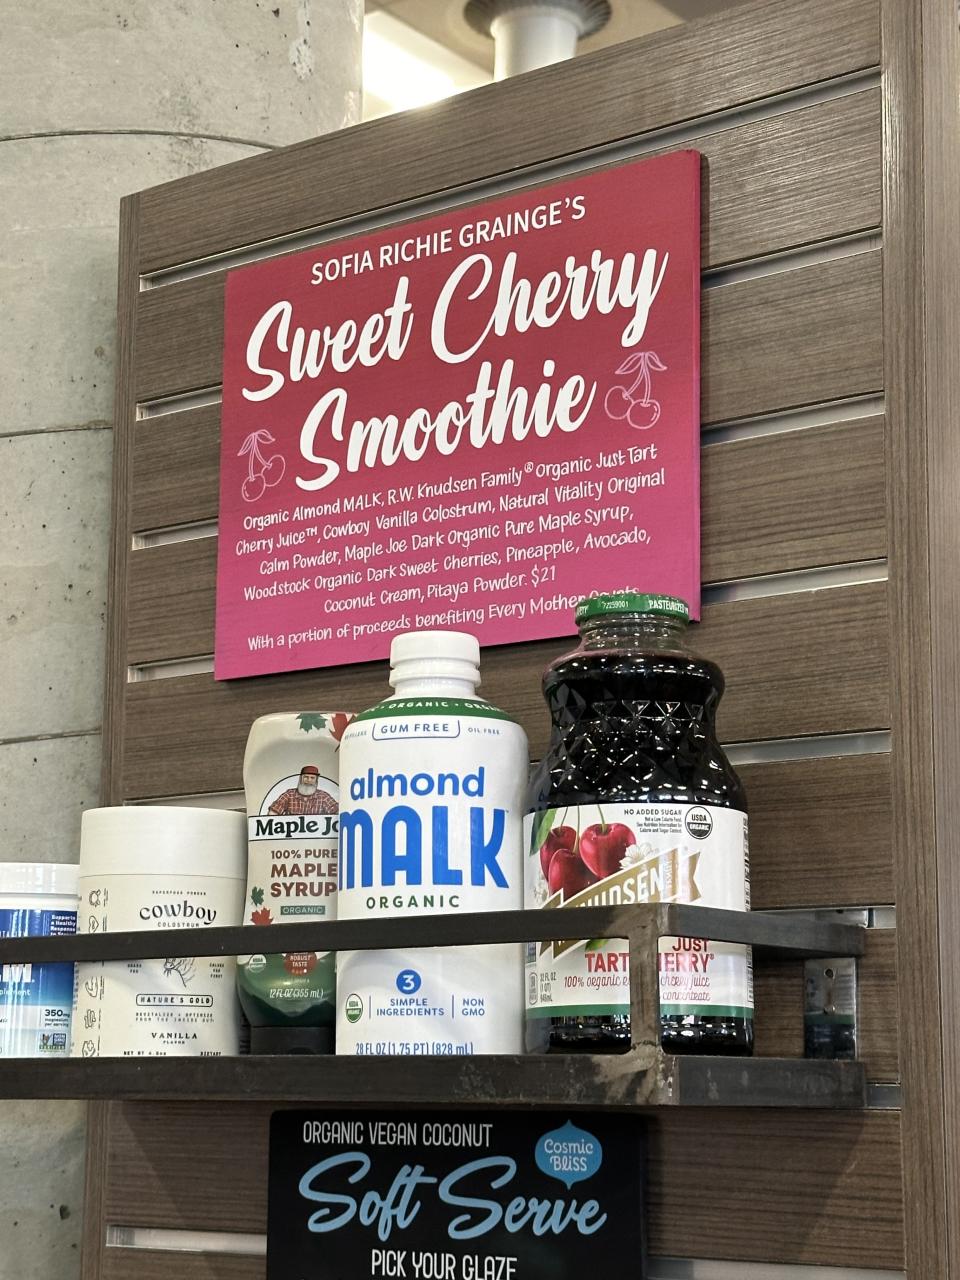 Shelf with various organic food products under a pink sign reading "SOFIA RICHIE GRAINGE'S Sweet Smoothie Cherry Smoothie."